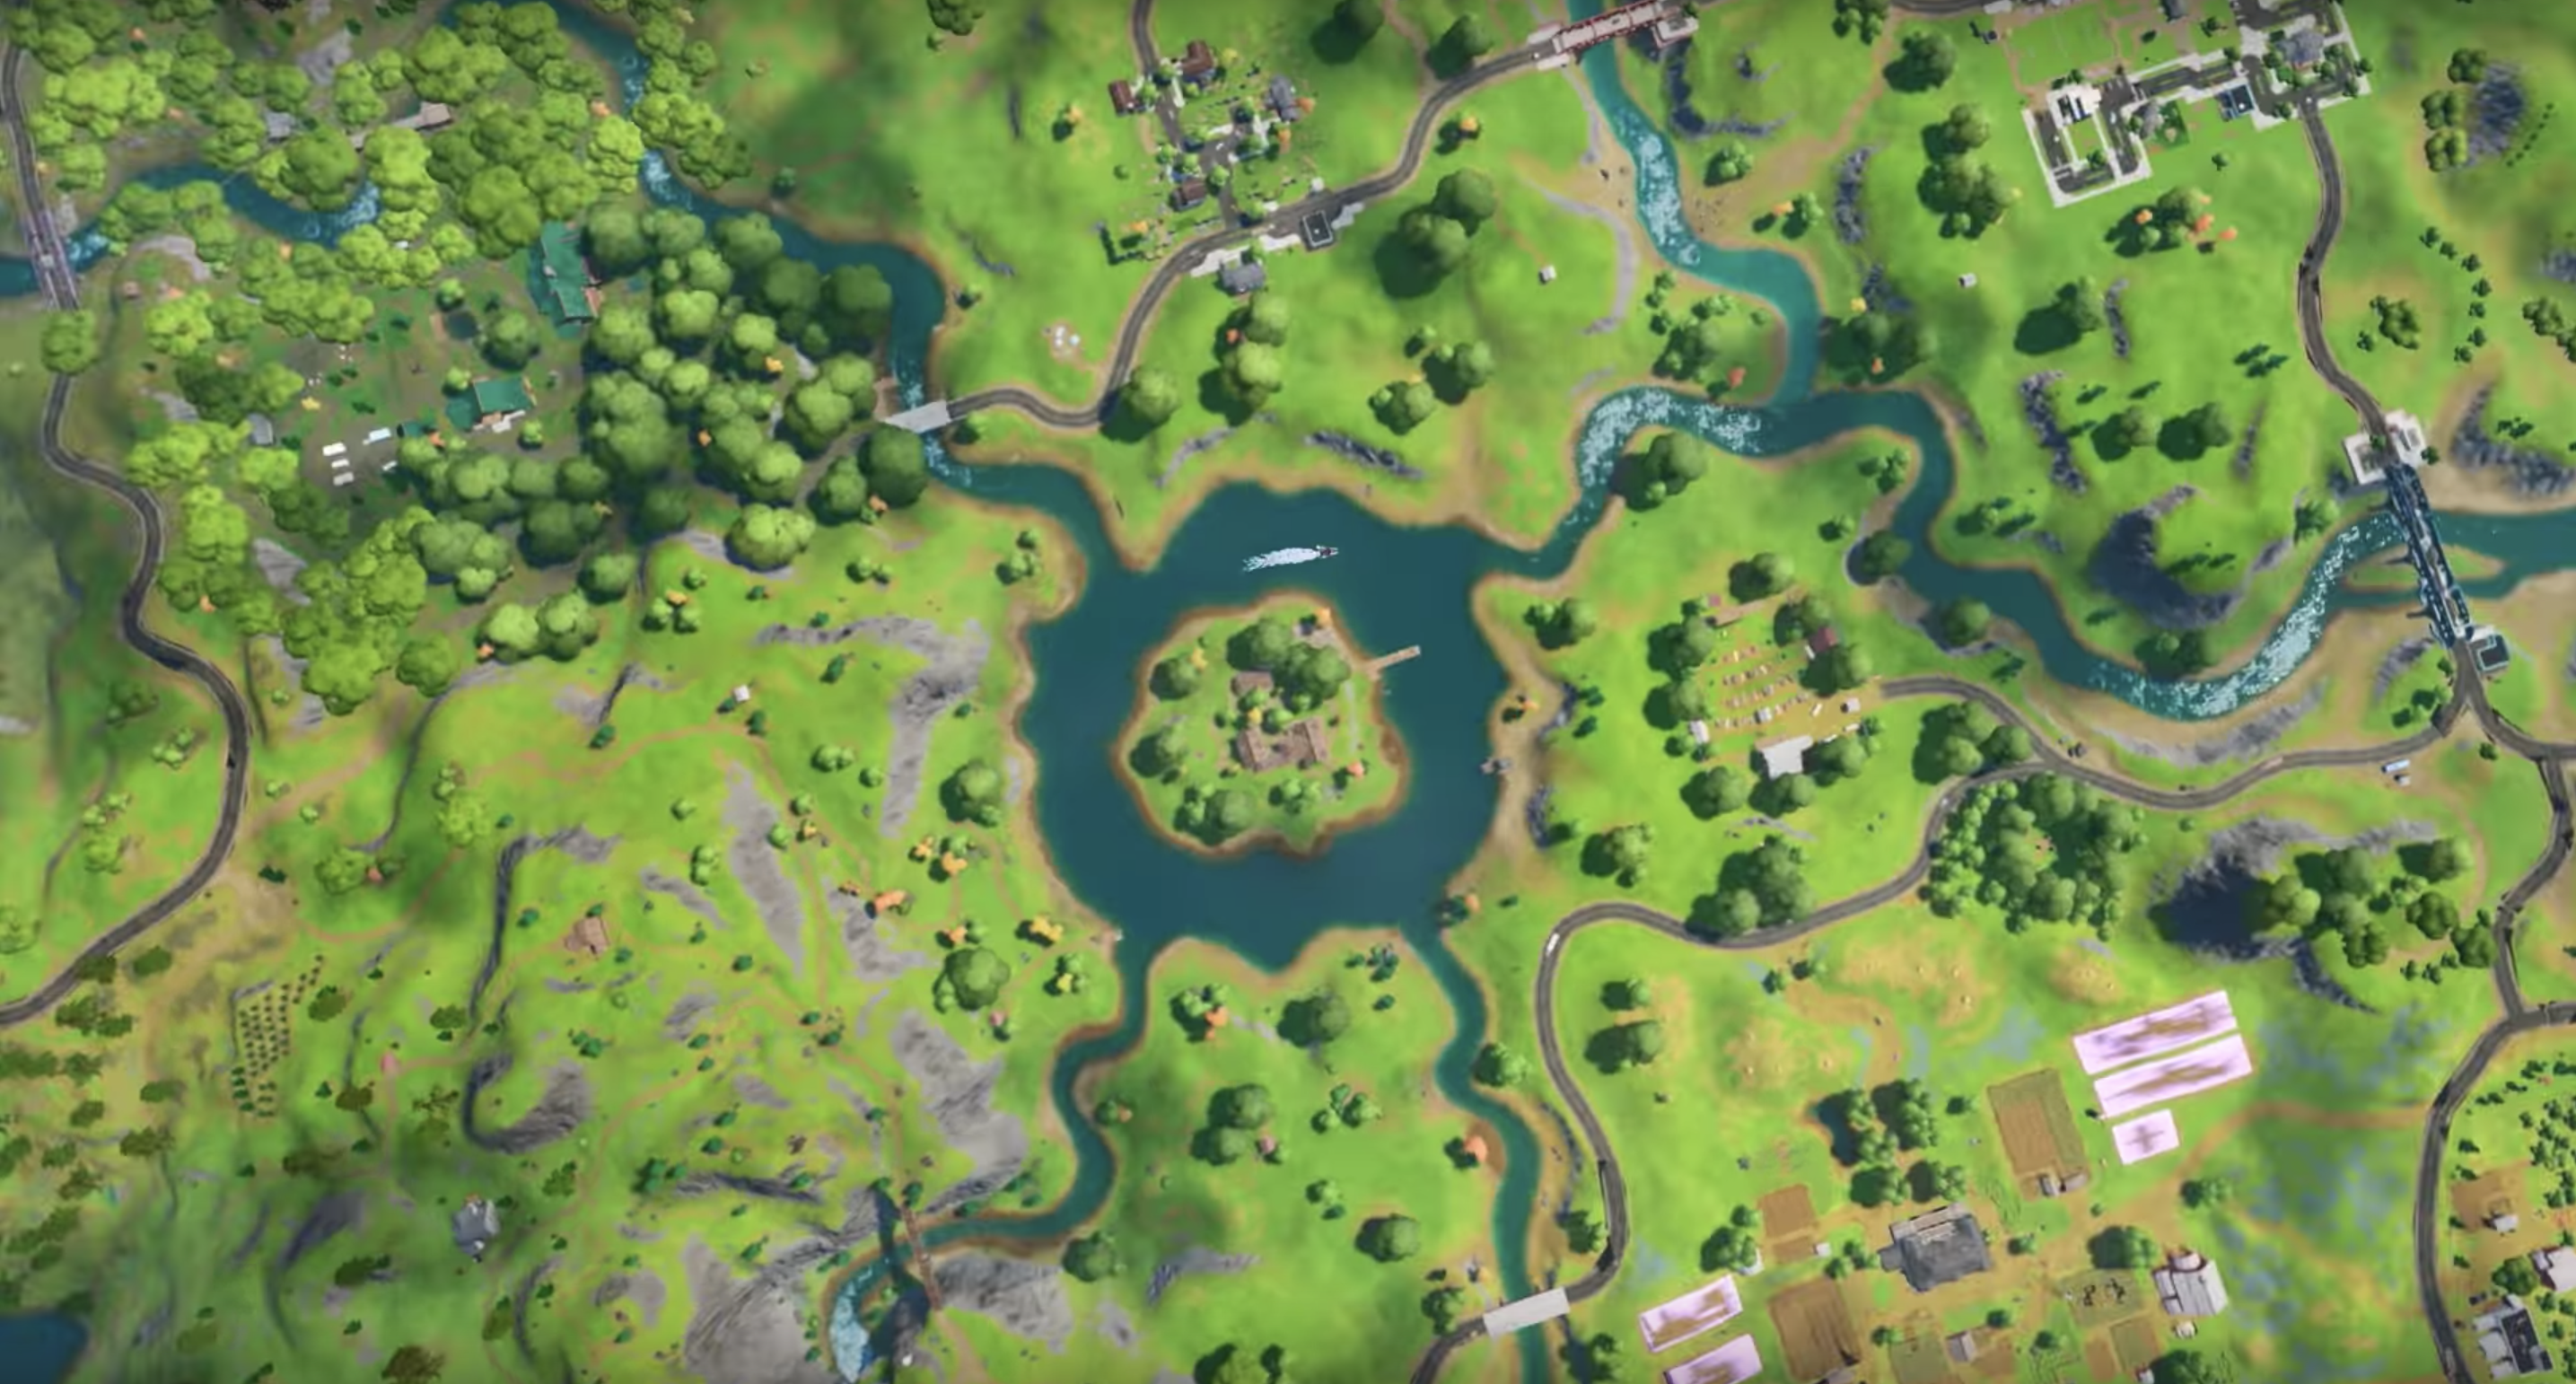 Fortnite Returns With The Launch Of A New Map For Chapter 2